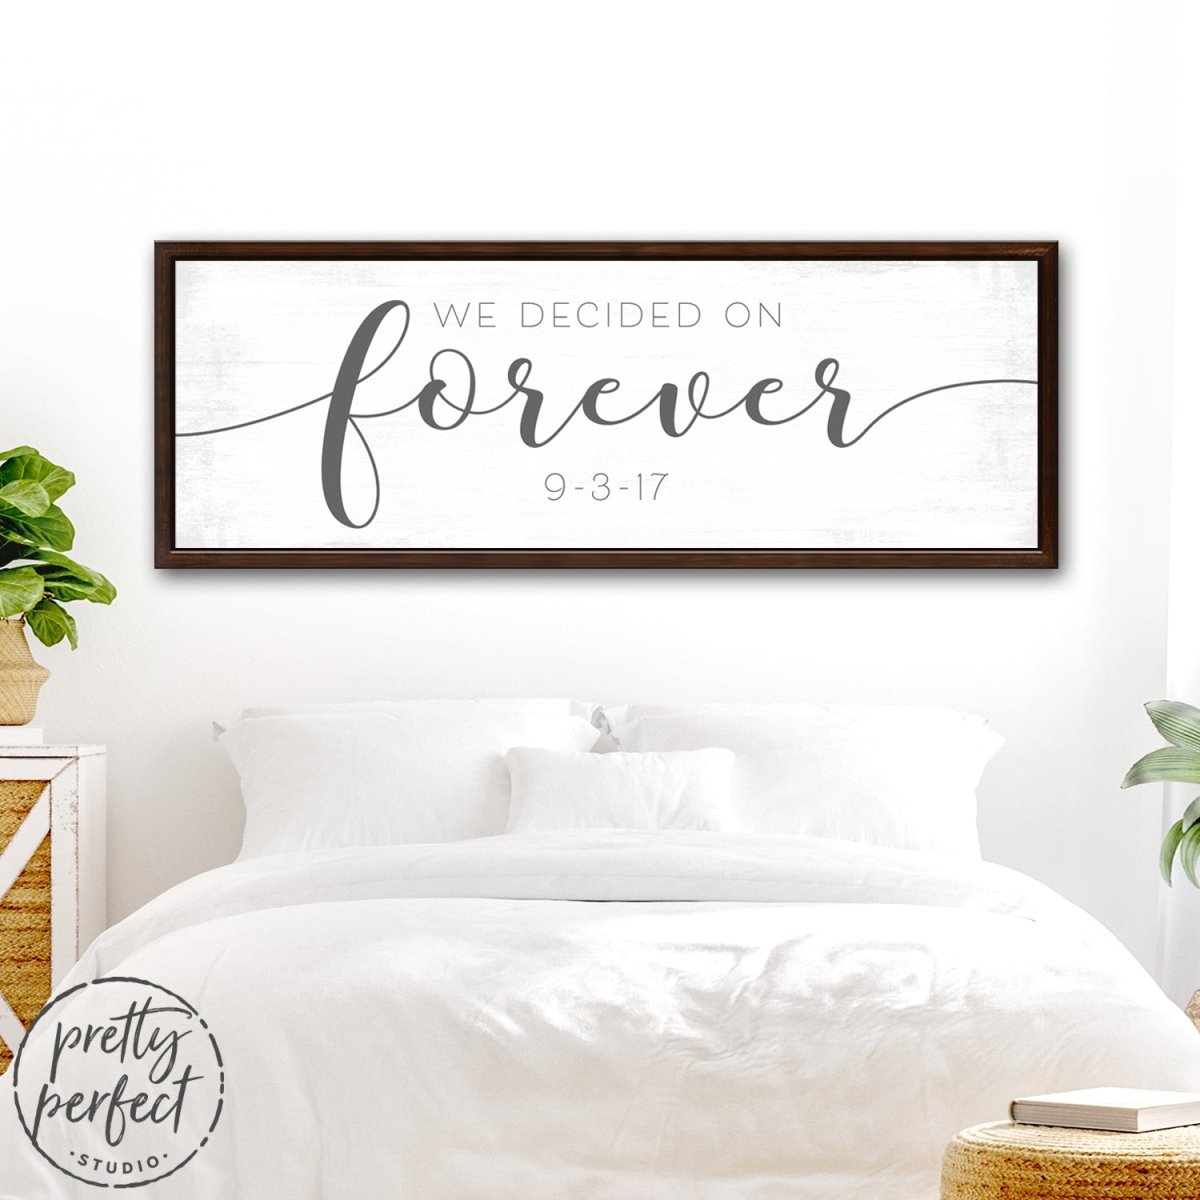 We Decided On Forever - Personalized Wedding Date Sign Above Bed - Pretty Perfect Studio